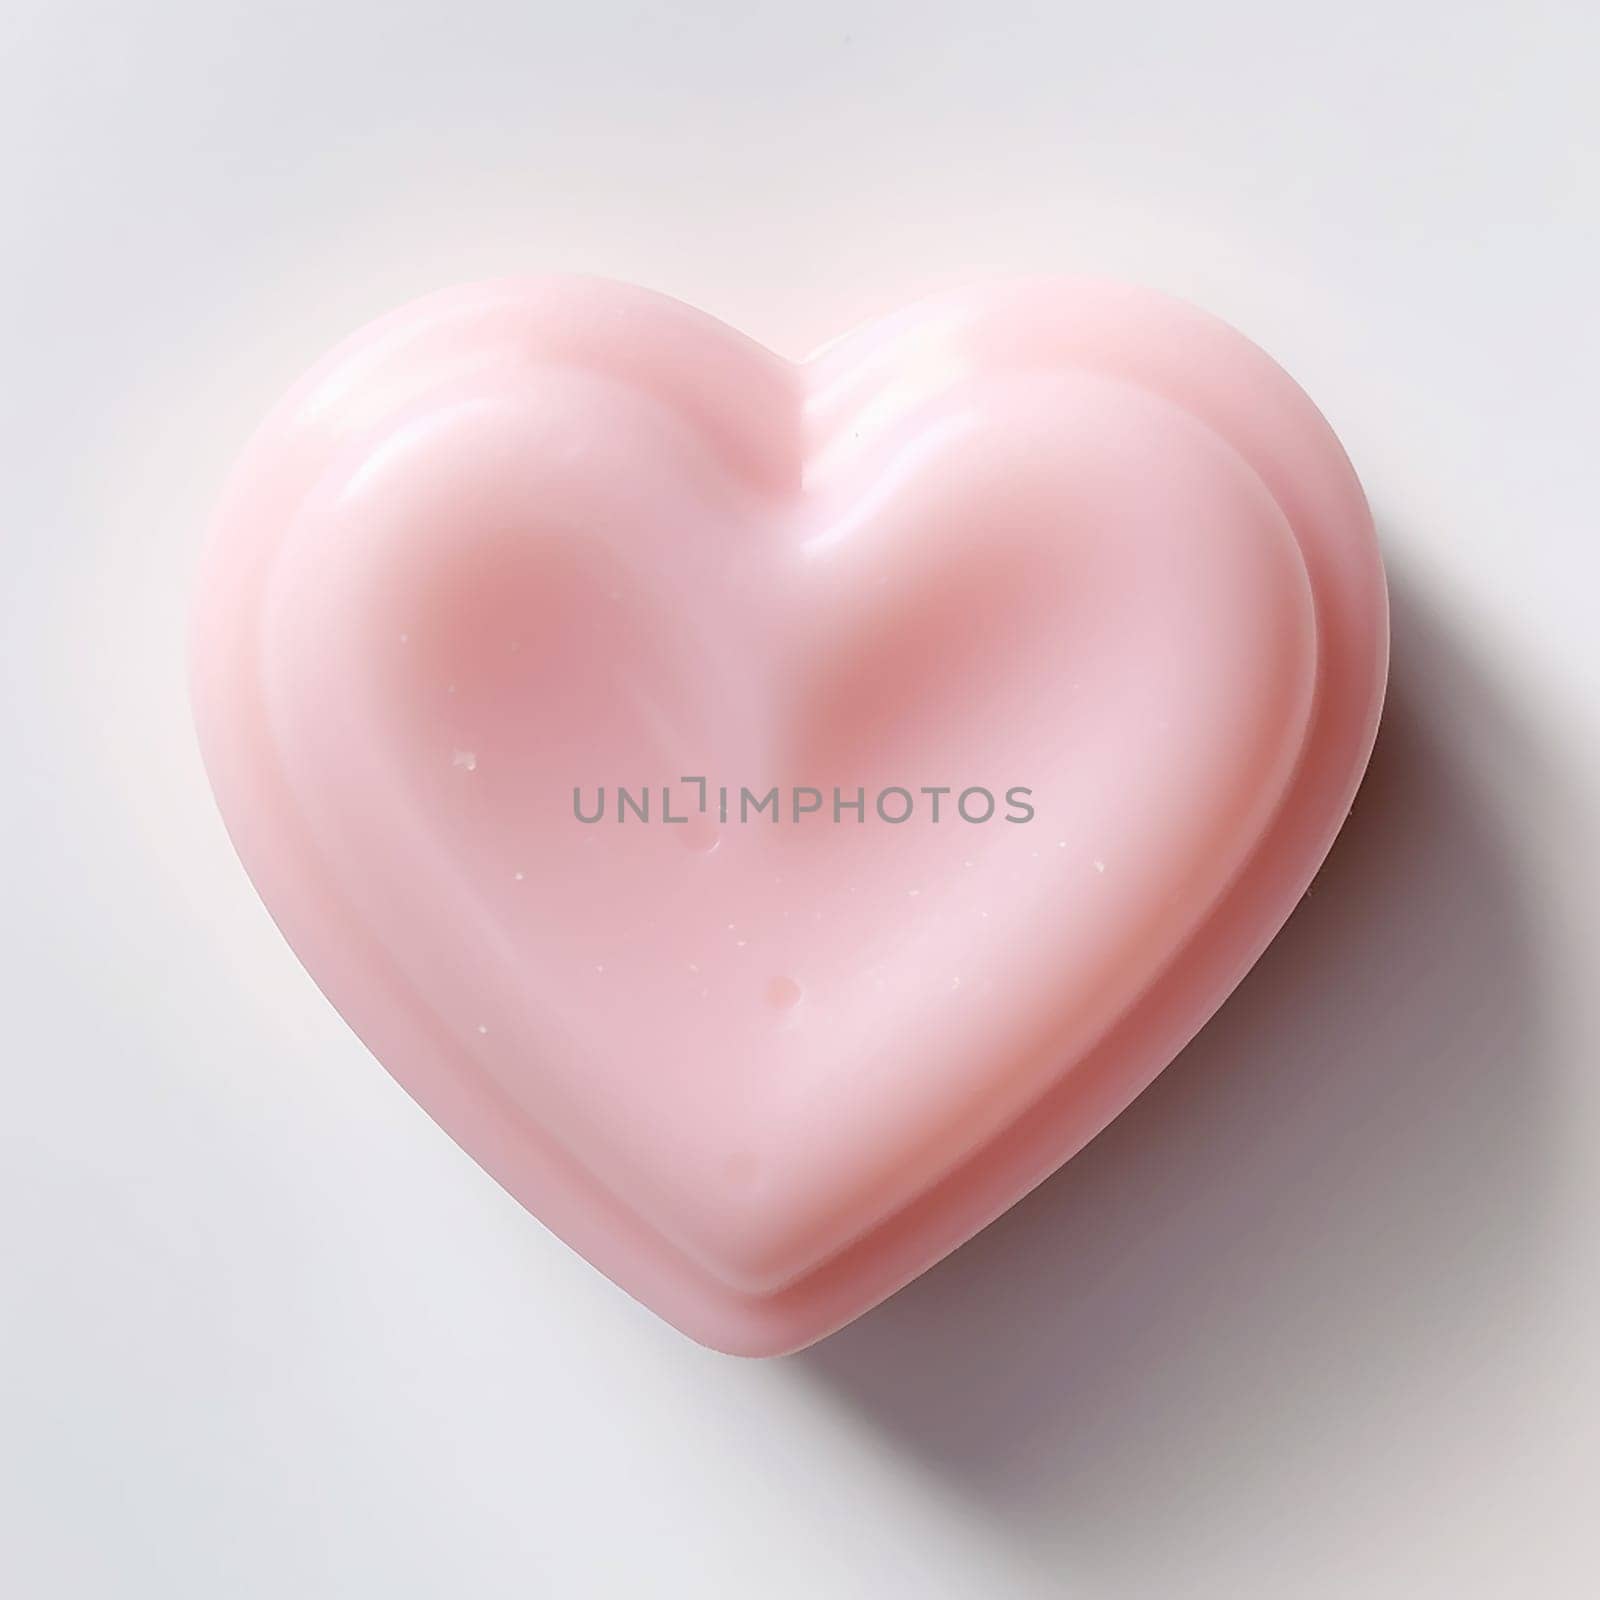 Pink heart shaped object with a smooth, shiny surface. by Hype2art